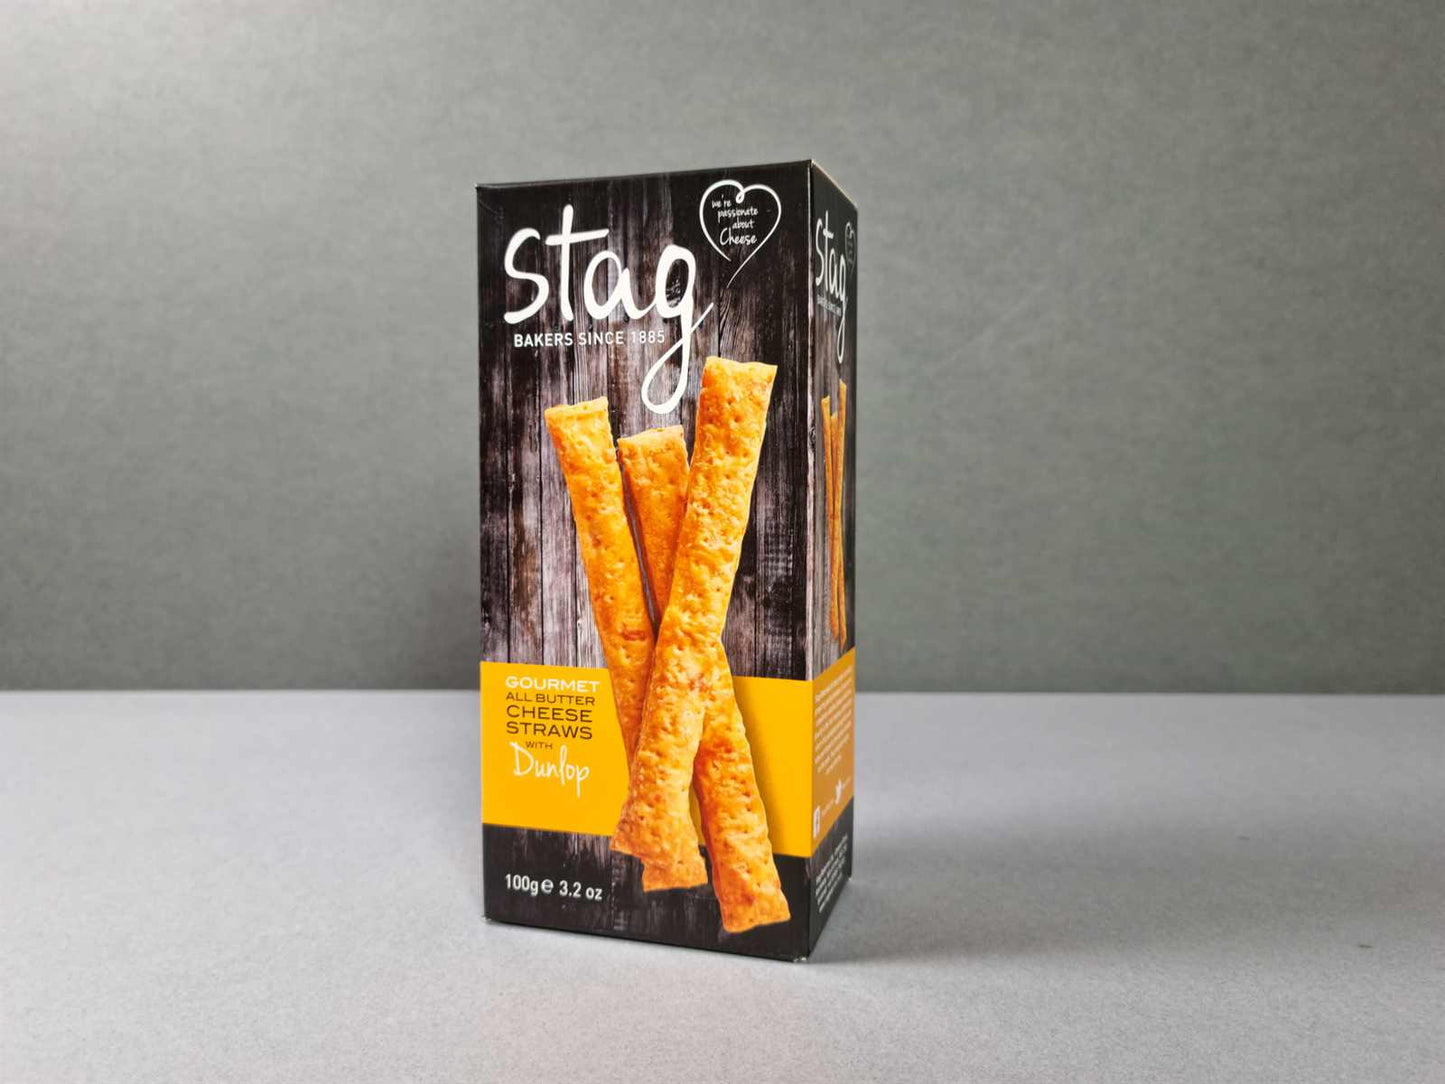 Stag Water biscuits